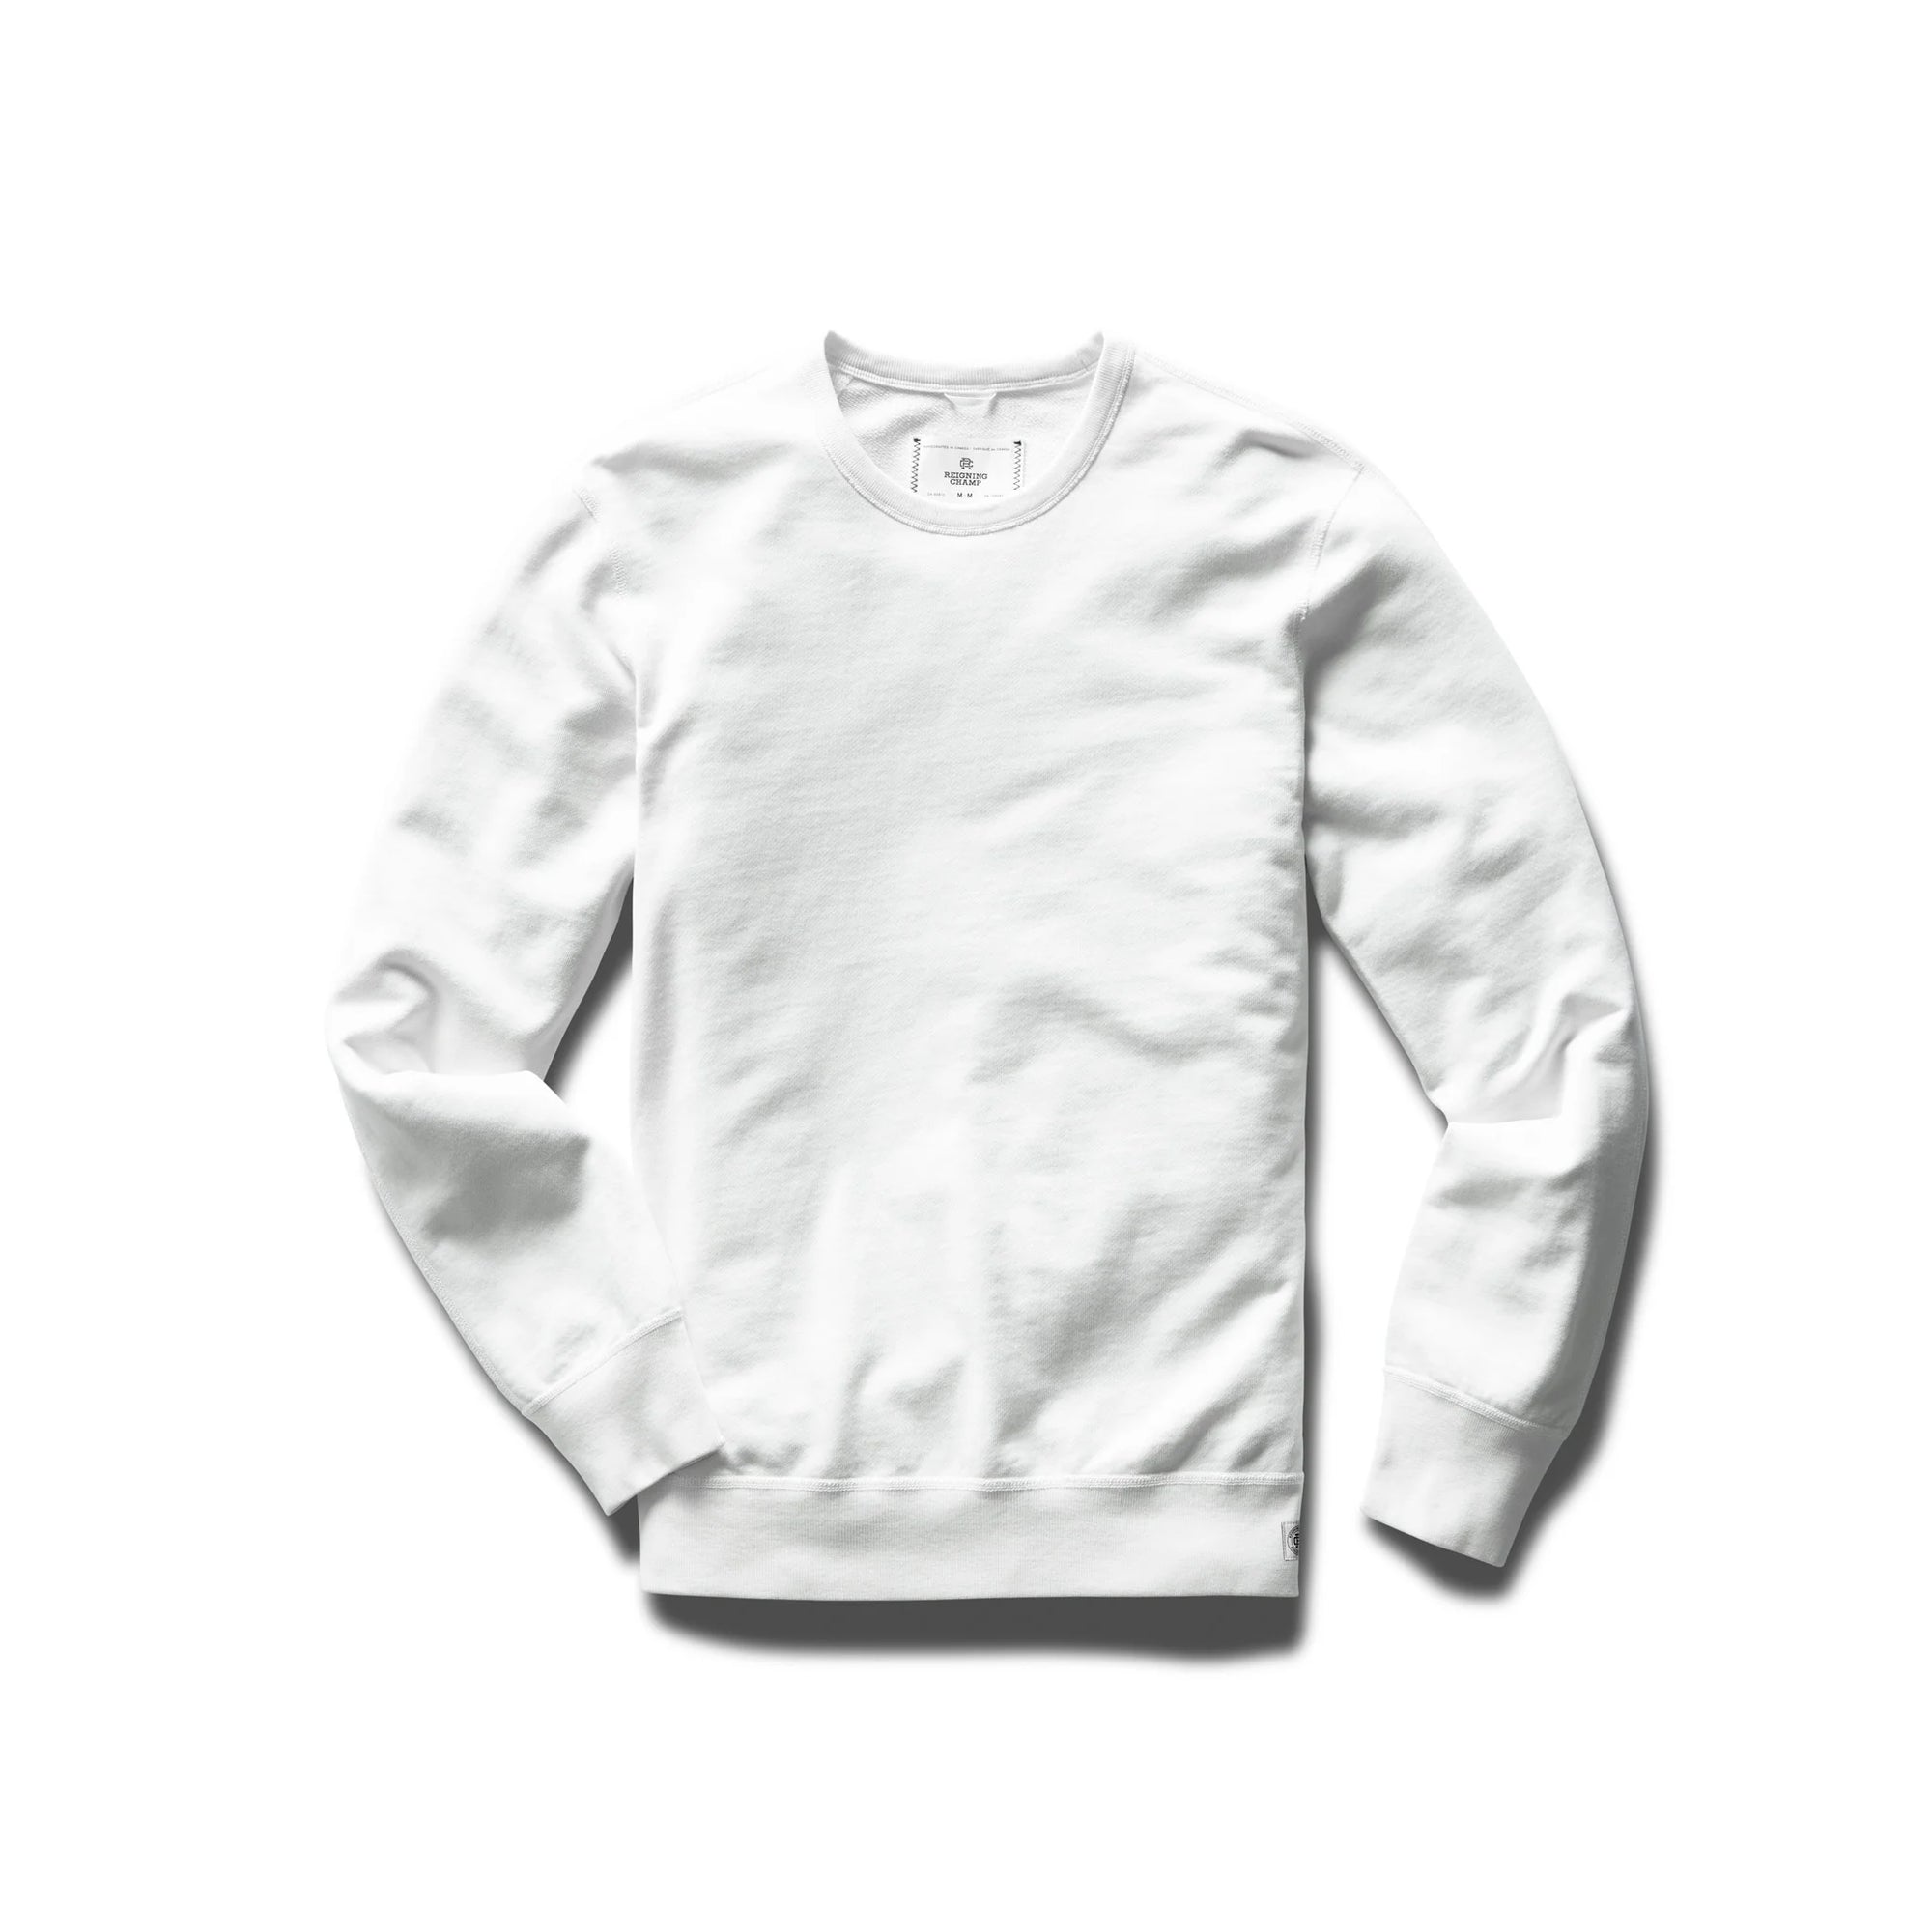 Reigning Champ Lightweight Terry Crewneck in White